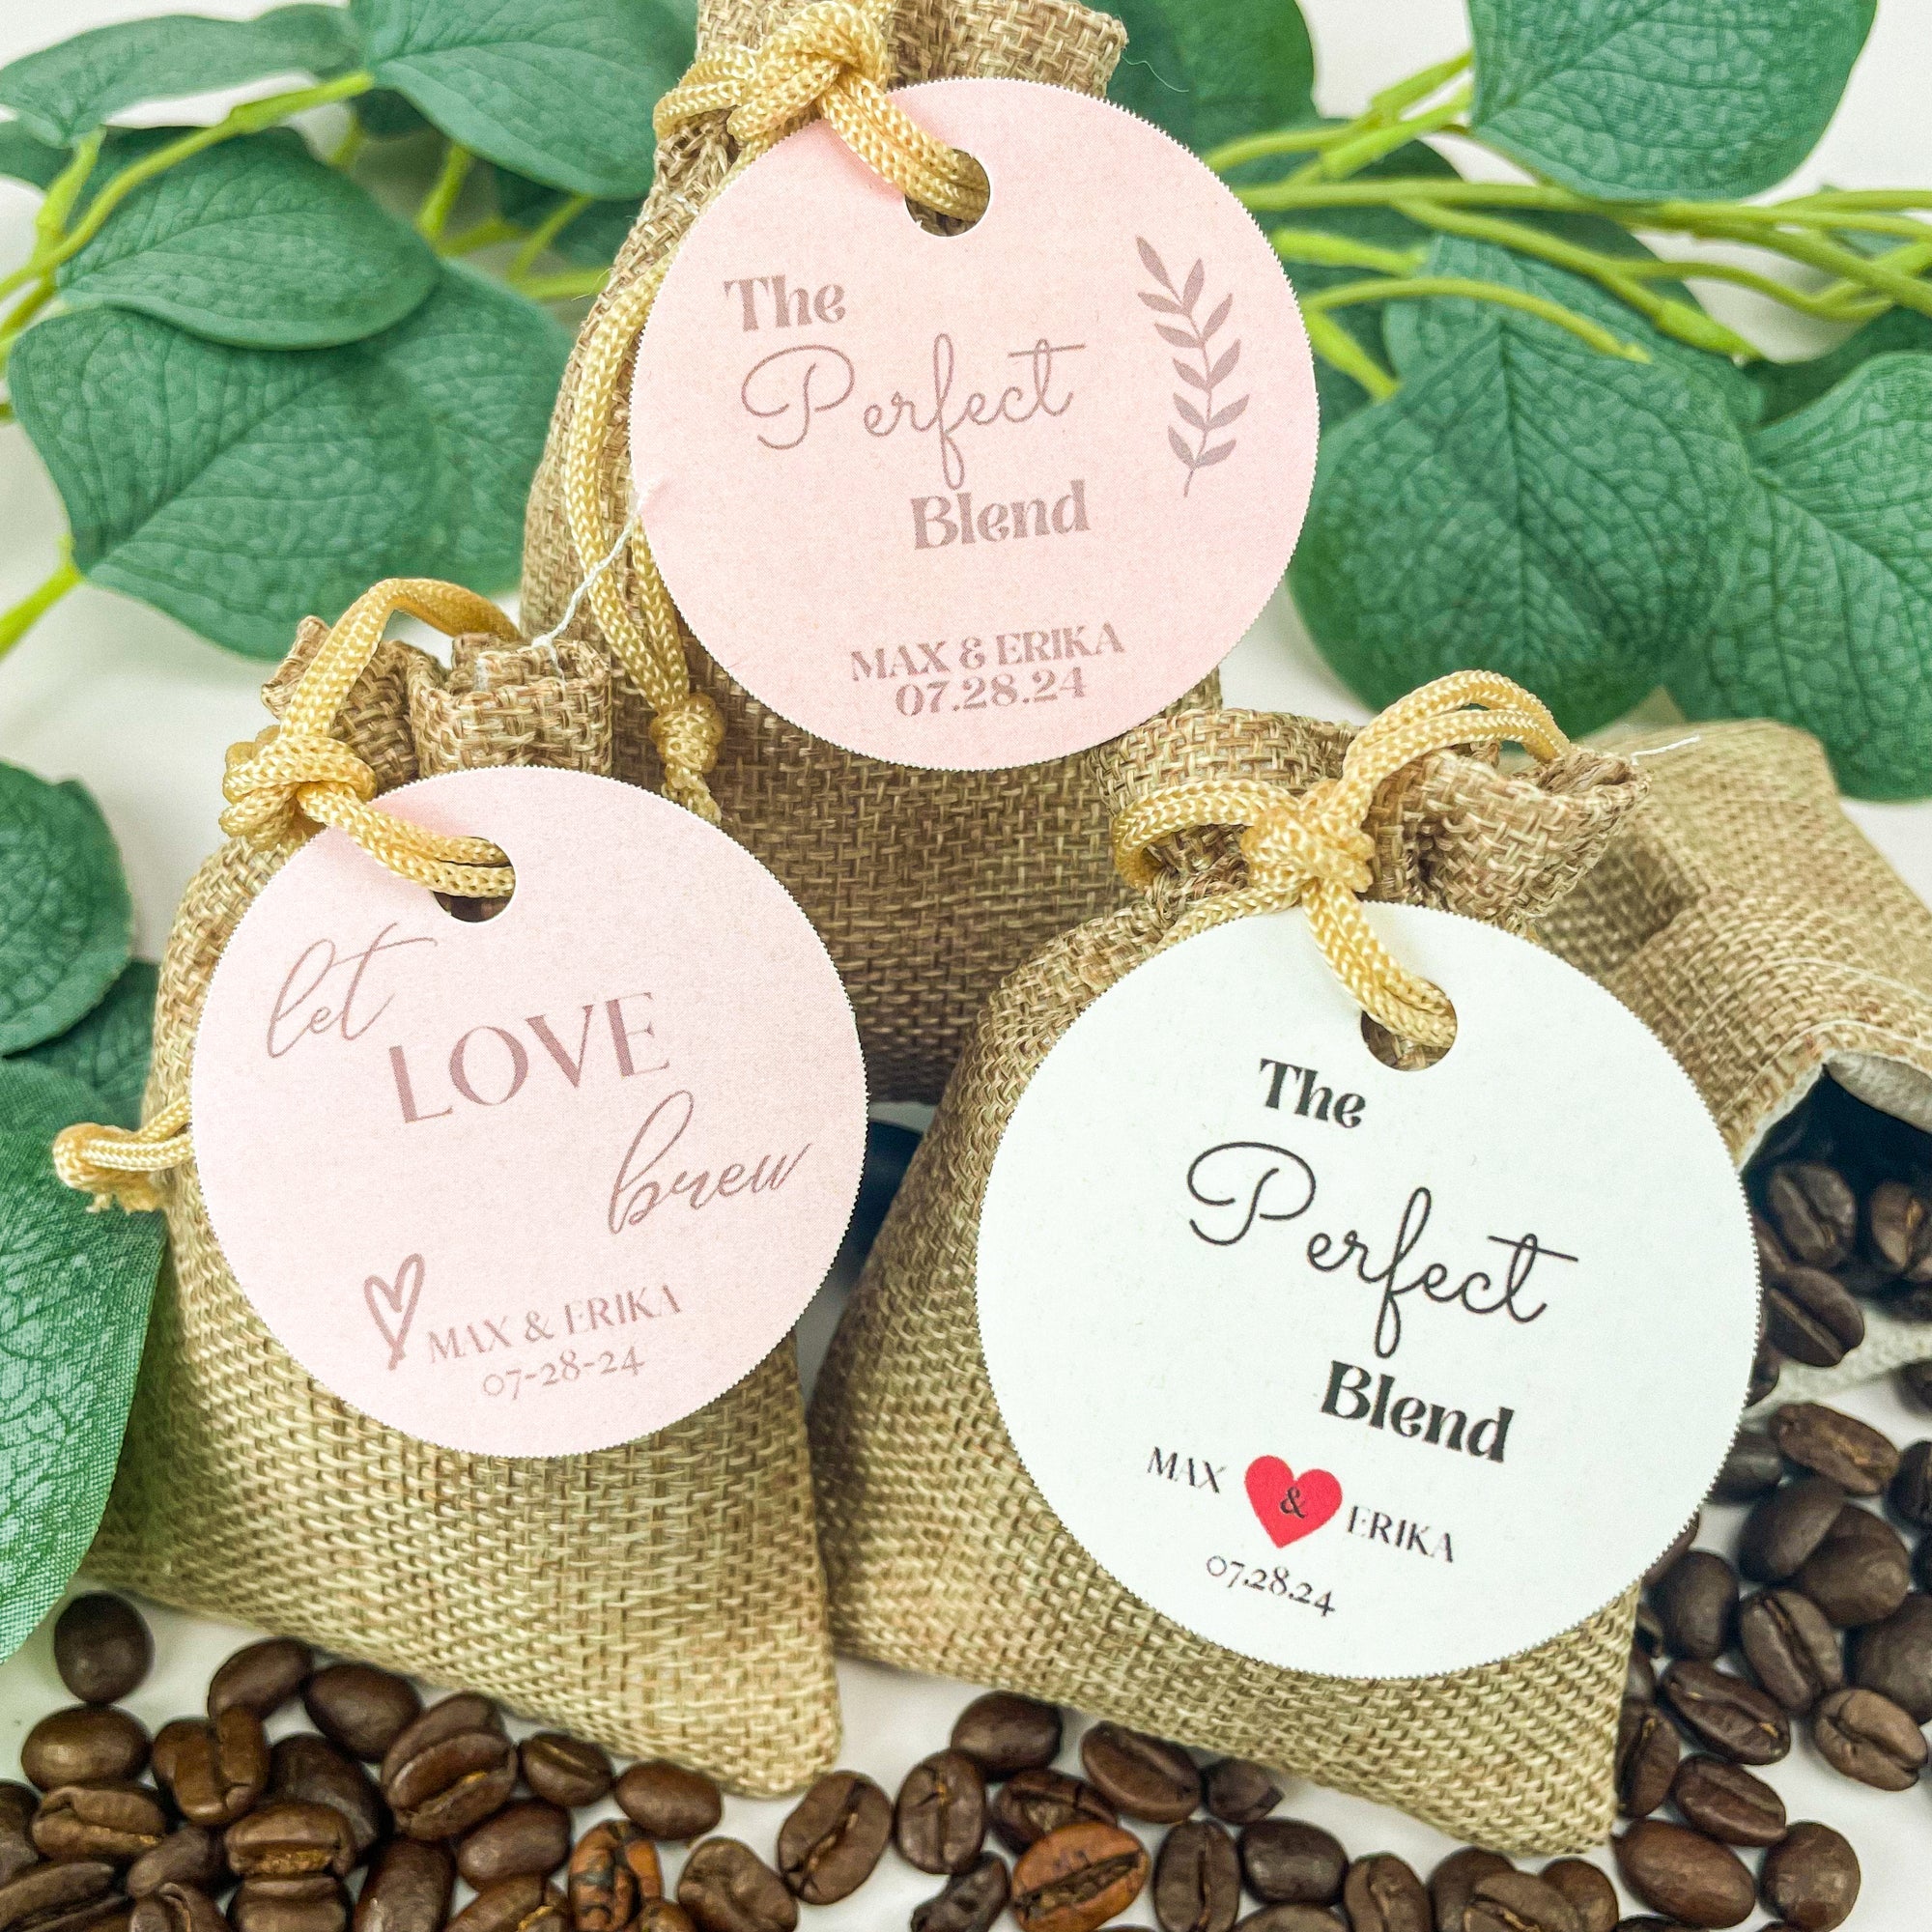 17 Wedding Gifts for Friends That Celebrate the Couple's Love - Forever  Wedding Favors